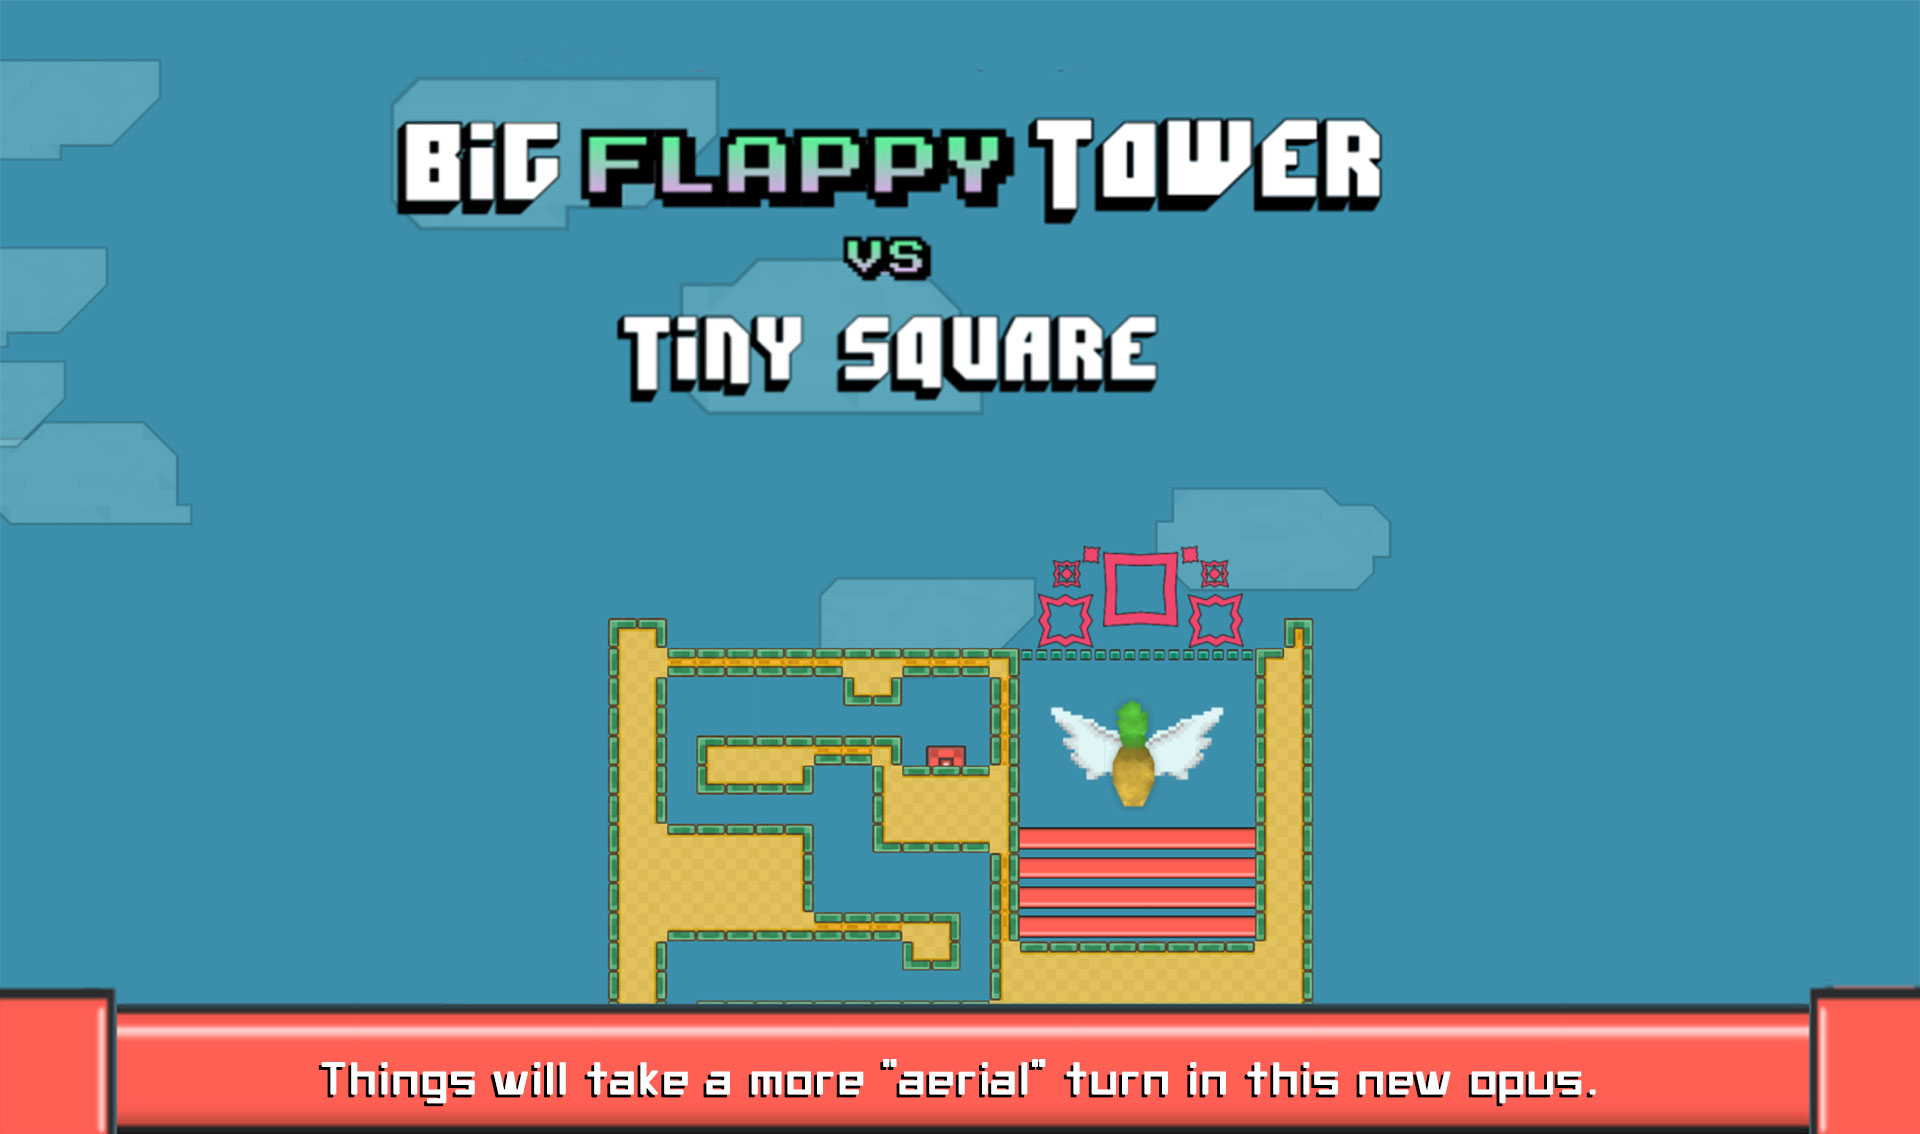 Big flappy tower tiny square (CHALLENGES) - Chess Forums 